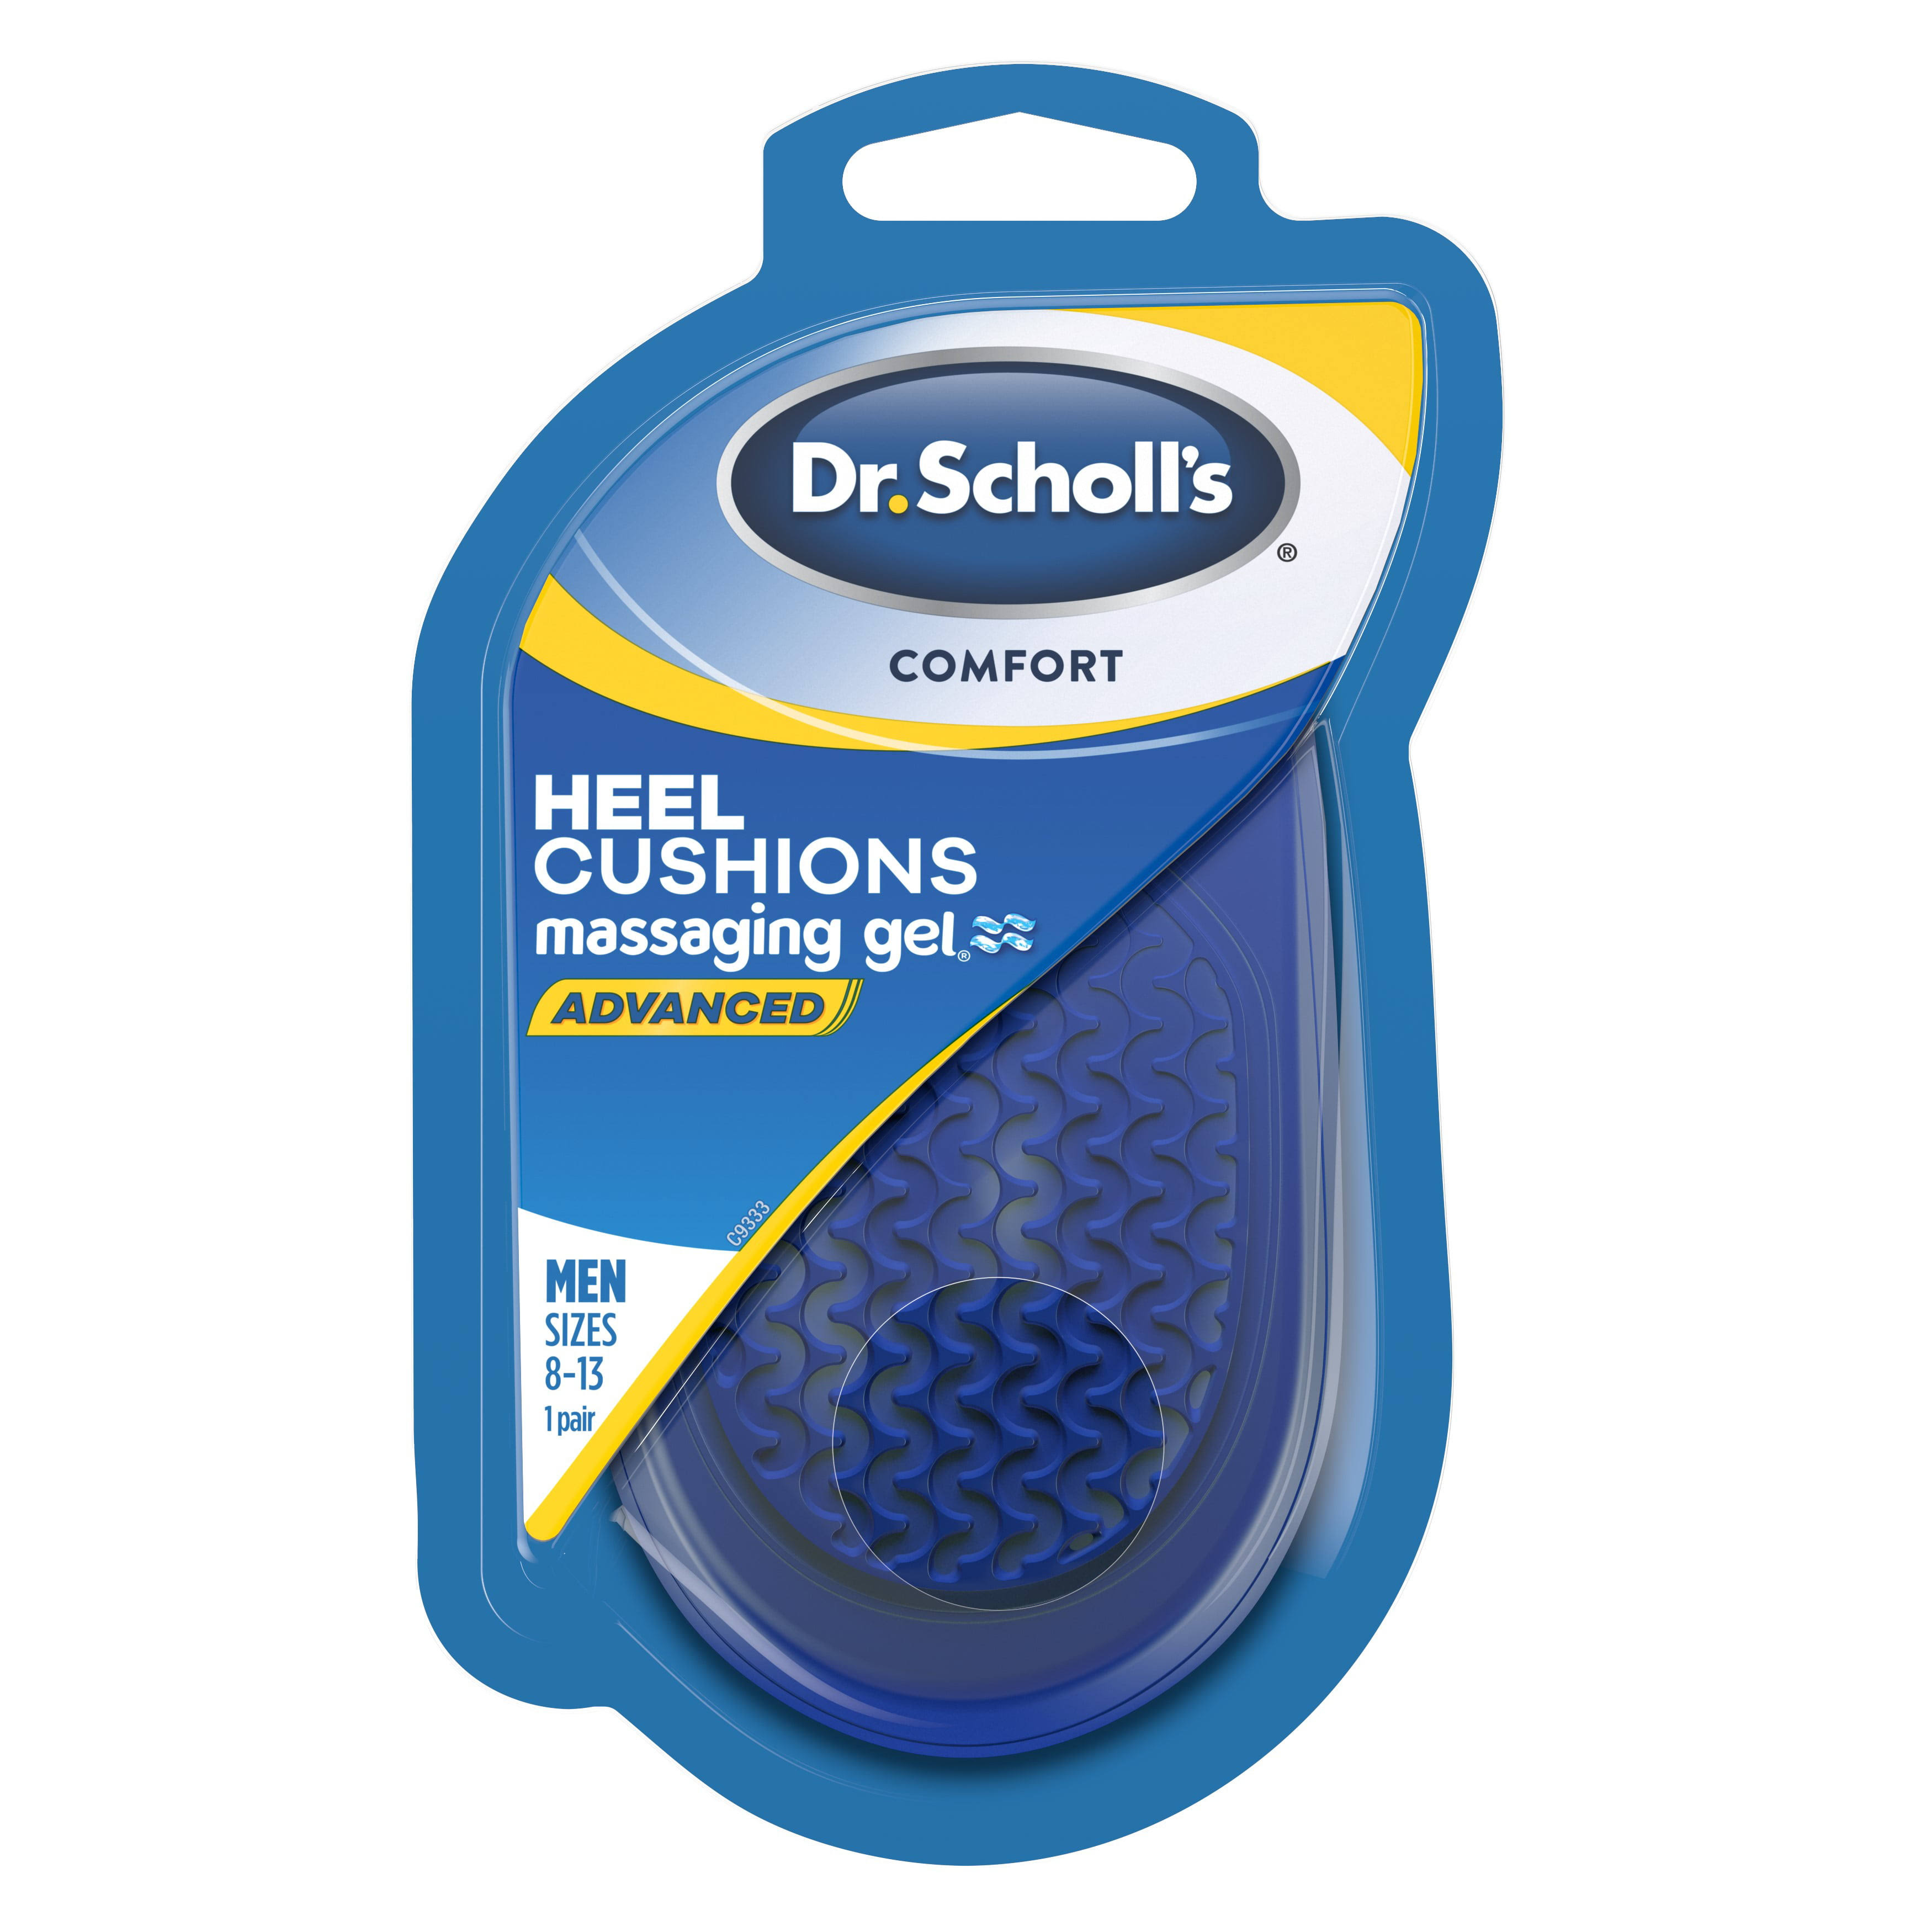 Dr. Scholl's Heel Cushions With Massaging Gel Advanced // All-Day Shock Absorption and Cushioning to Relieve Heel Discomfort (For Men's 8-13 Also